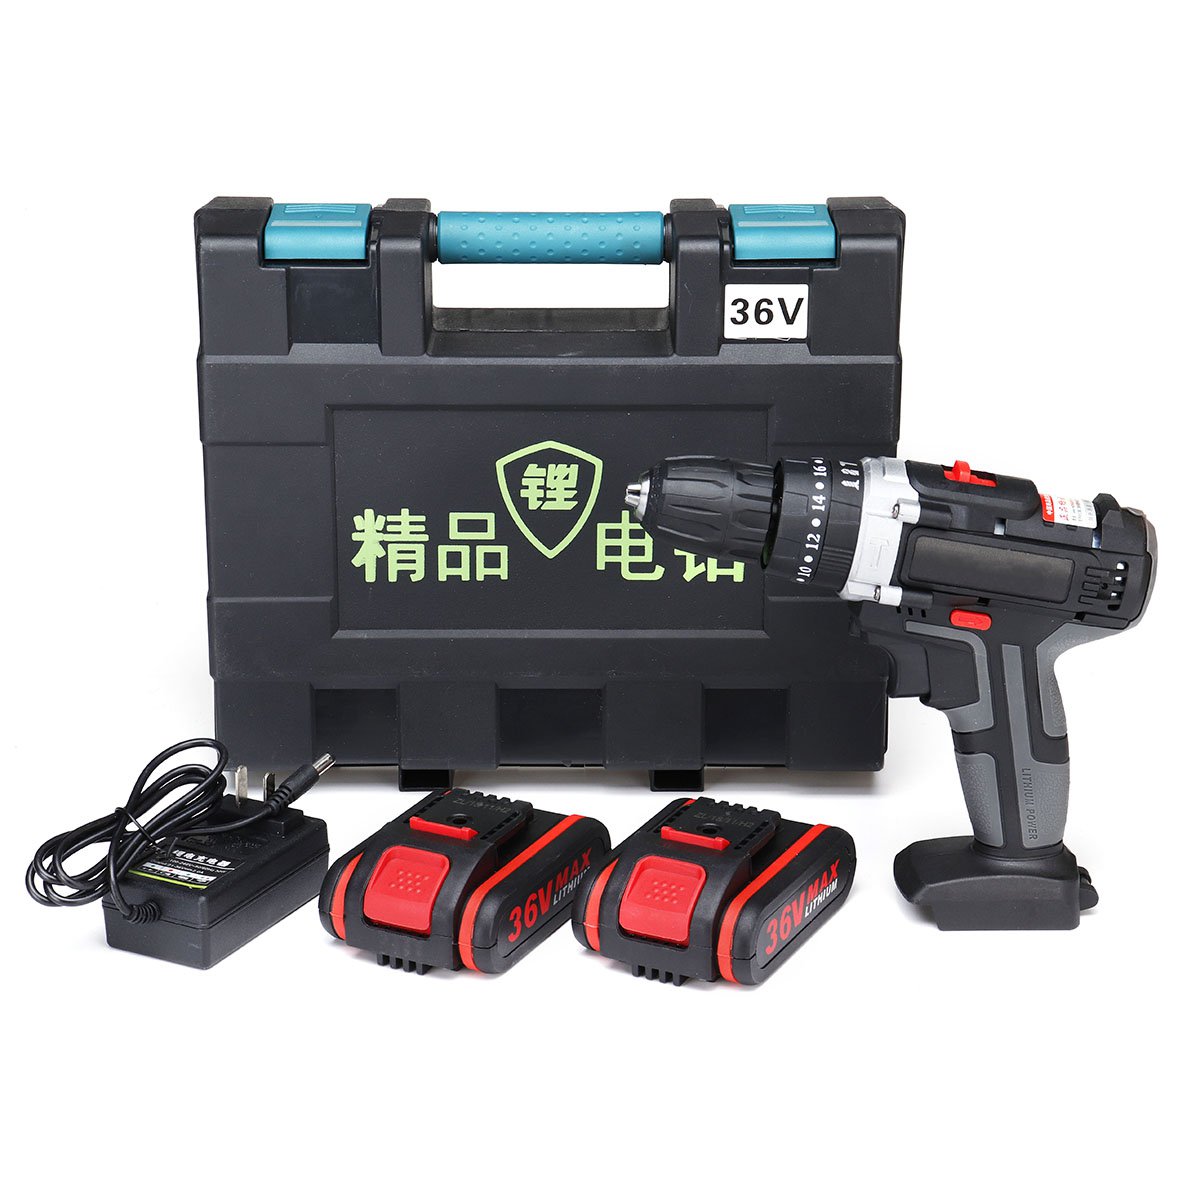 36V Cordless Lithium Electric Drill Impact Power Drills 28N.m 3000mAh 18+3 Torque Stage Drill Tools